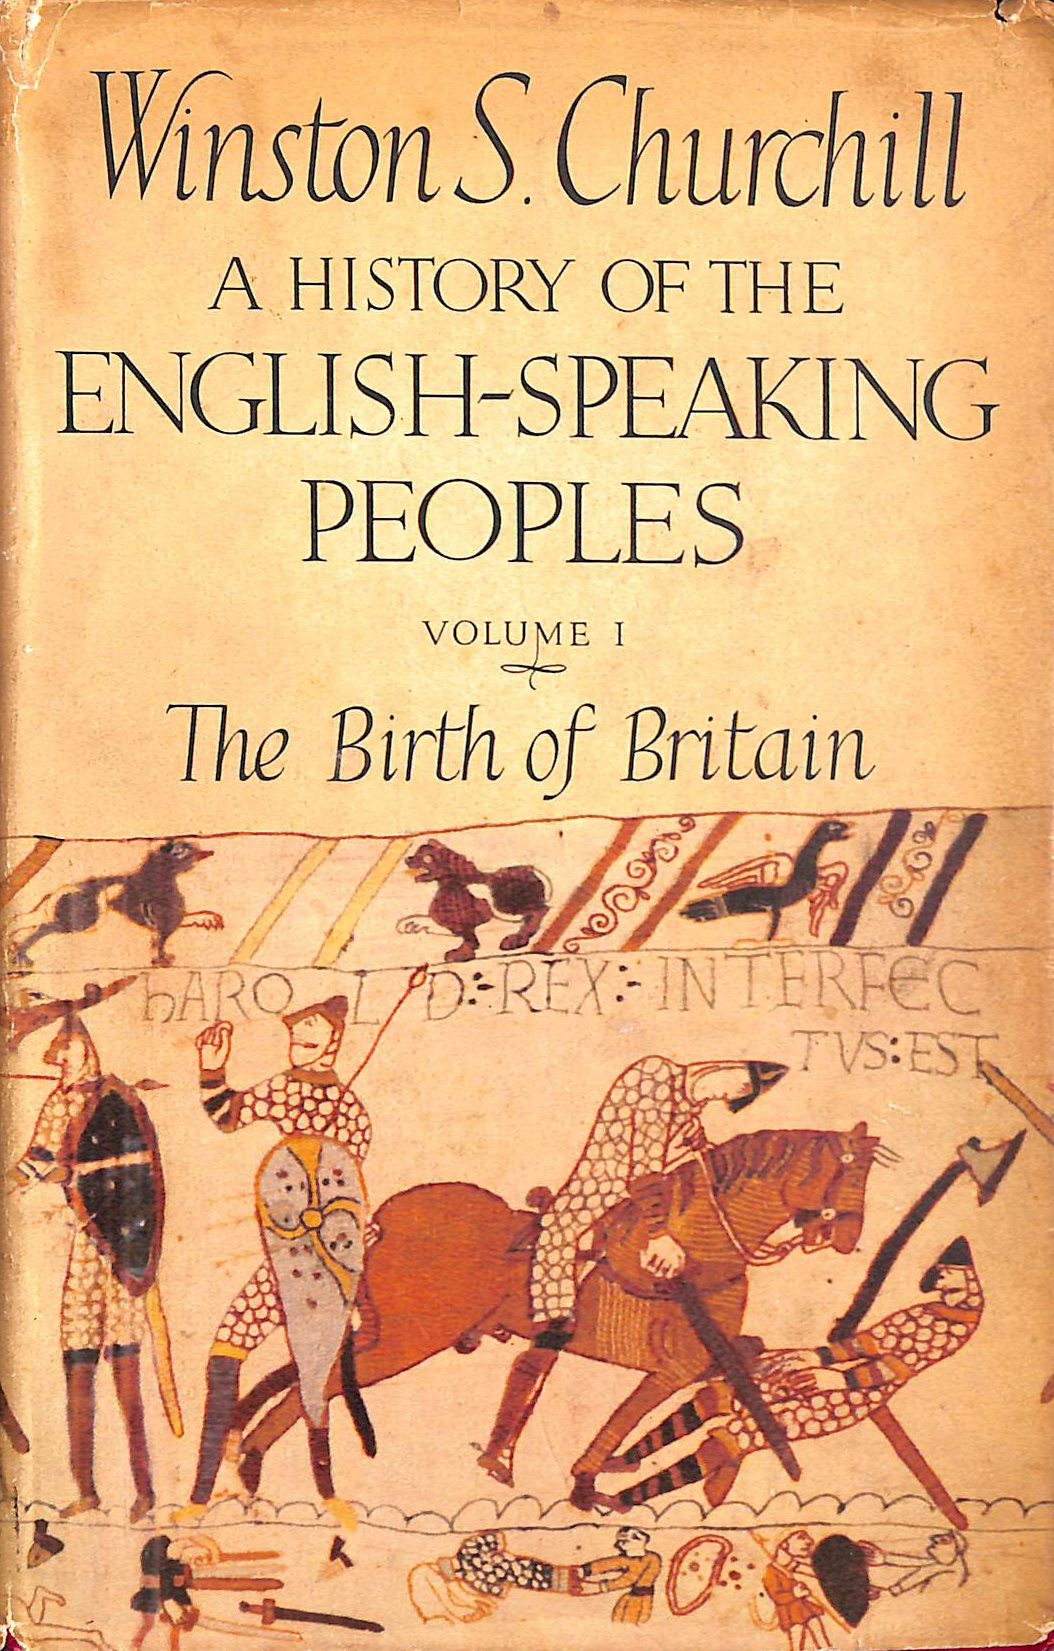 CHURCHHILL, WINSTON S. - A History of the English Speaking Peoples,Vol. 1: The Birth of Britain